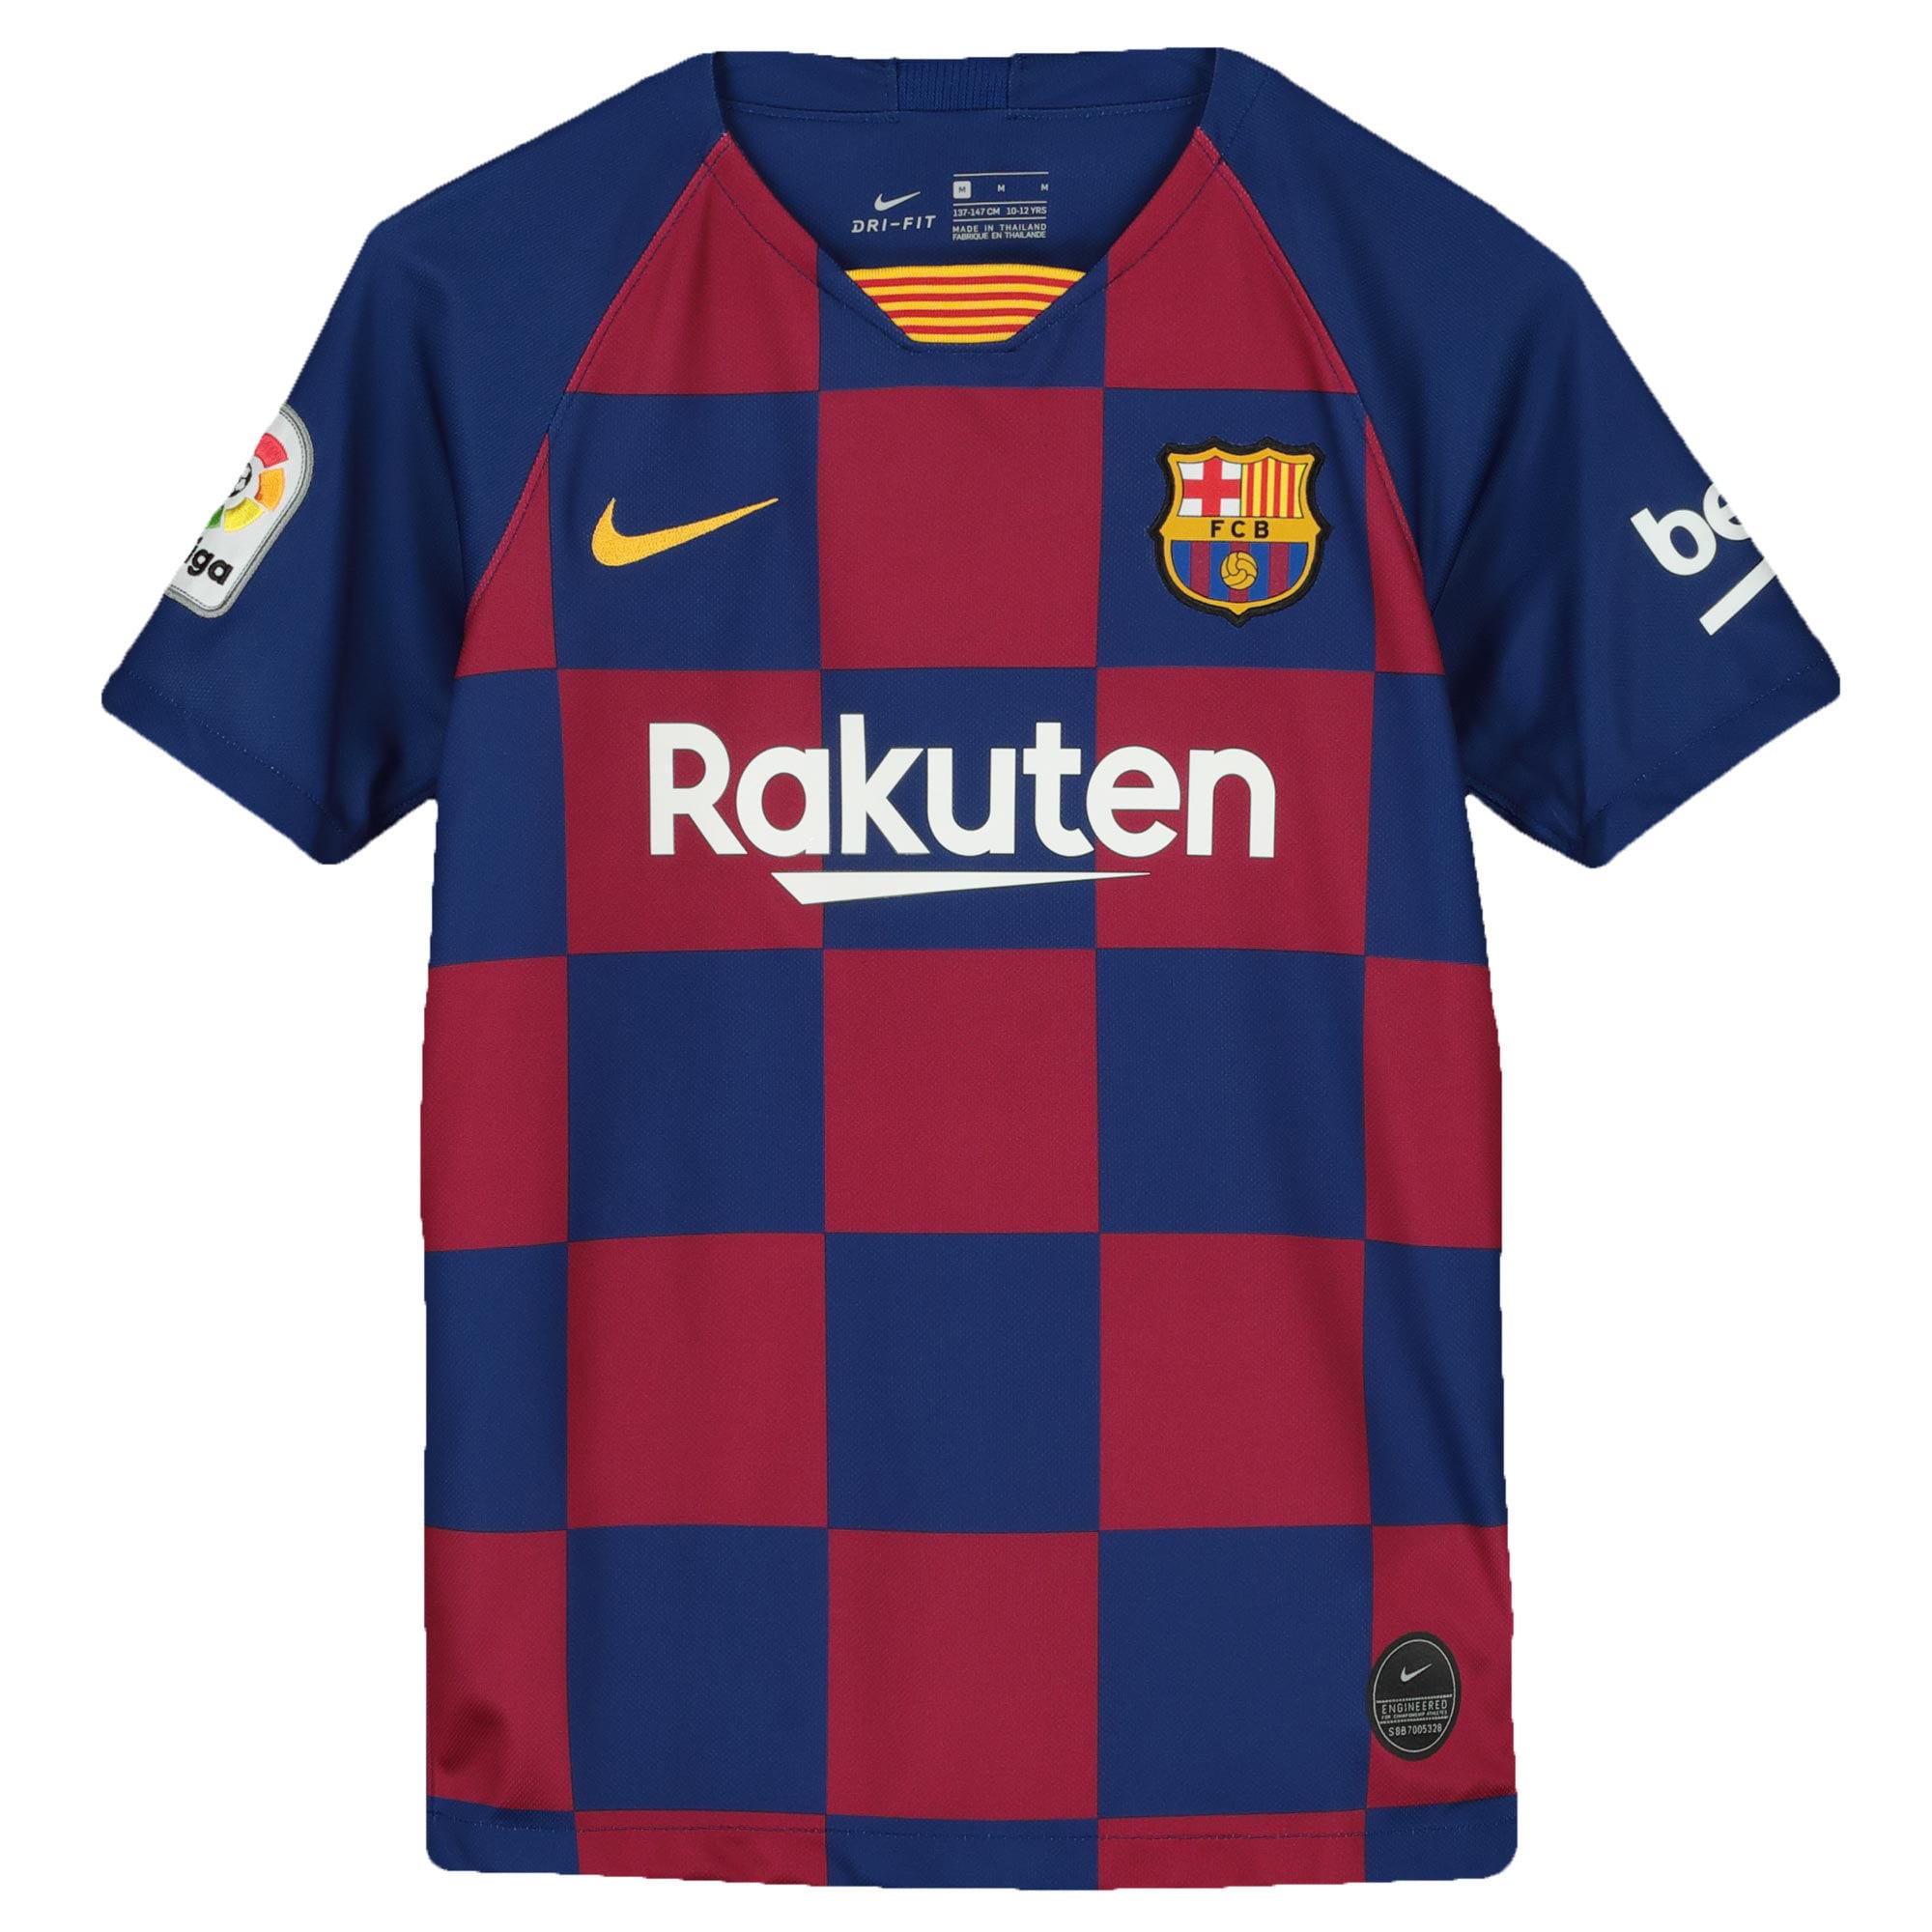 nike youth messi jersey